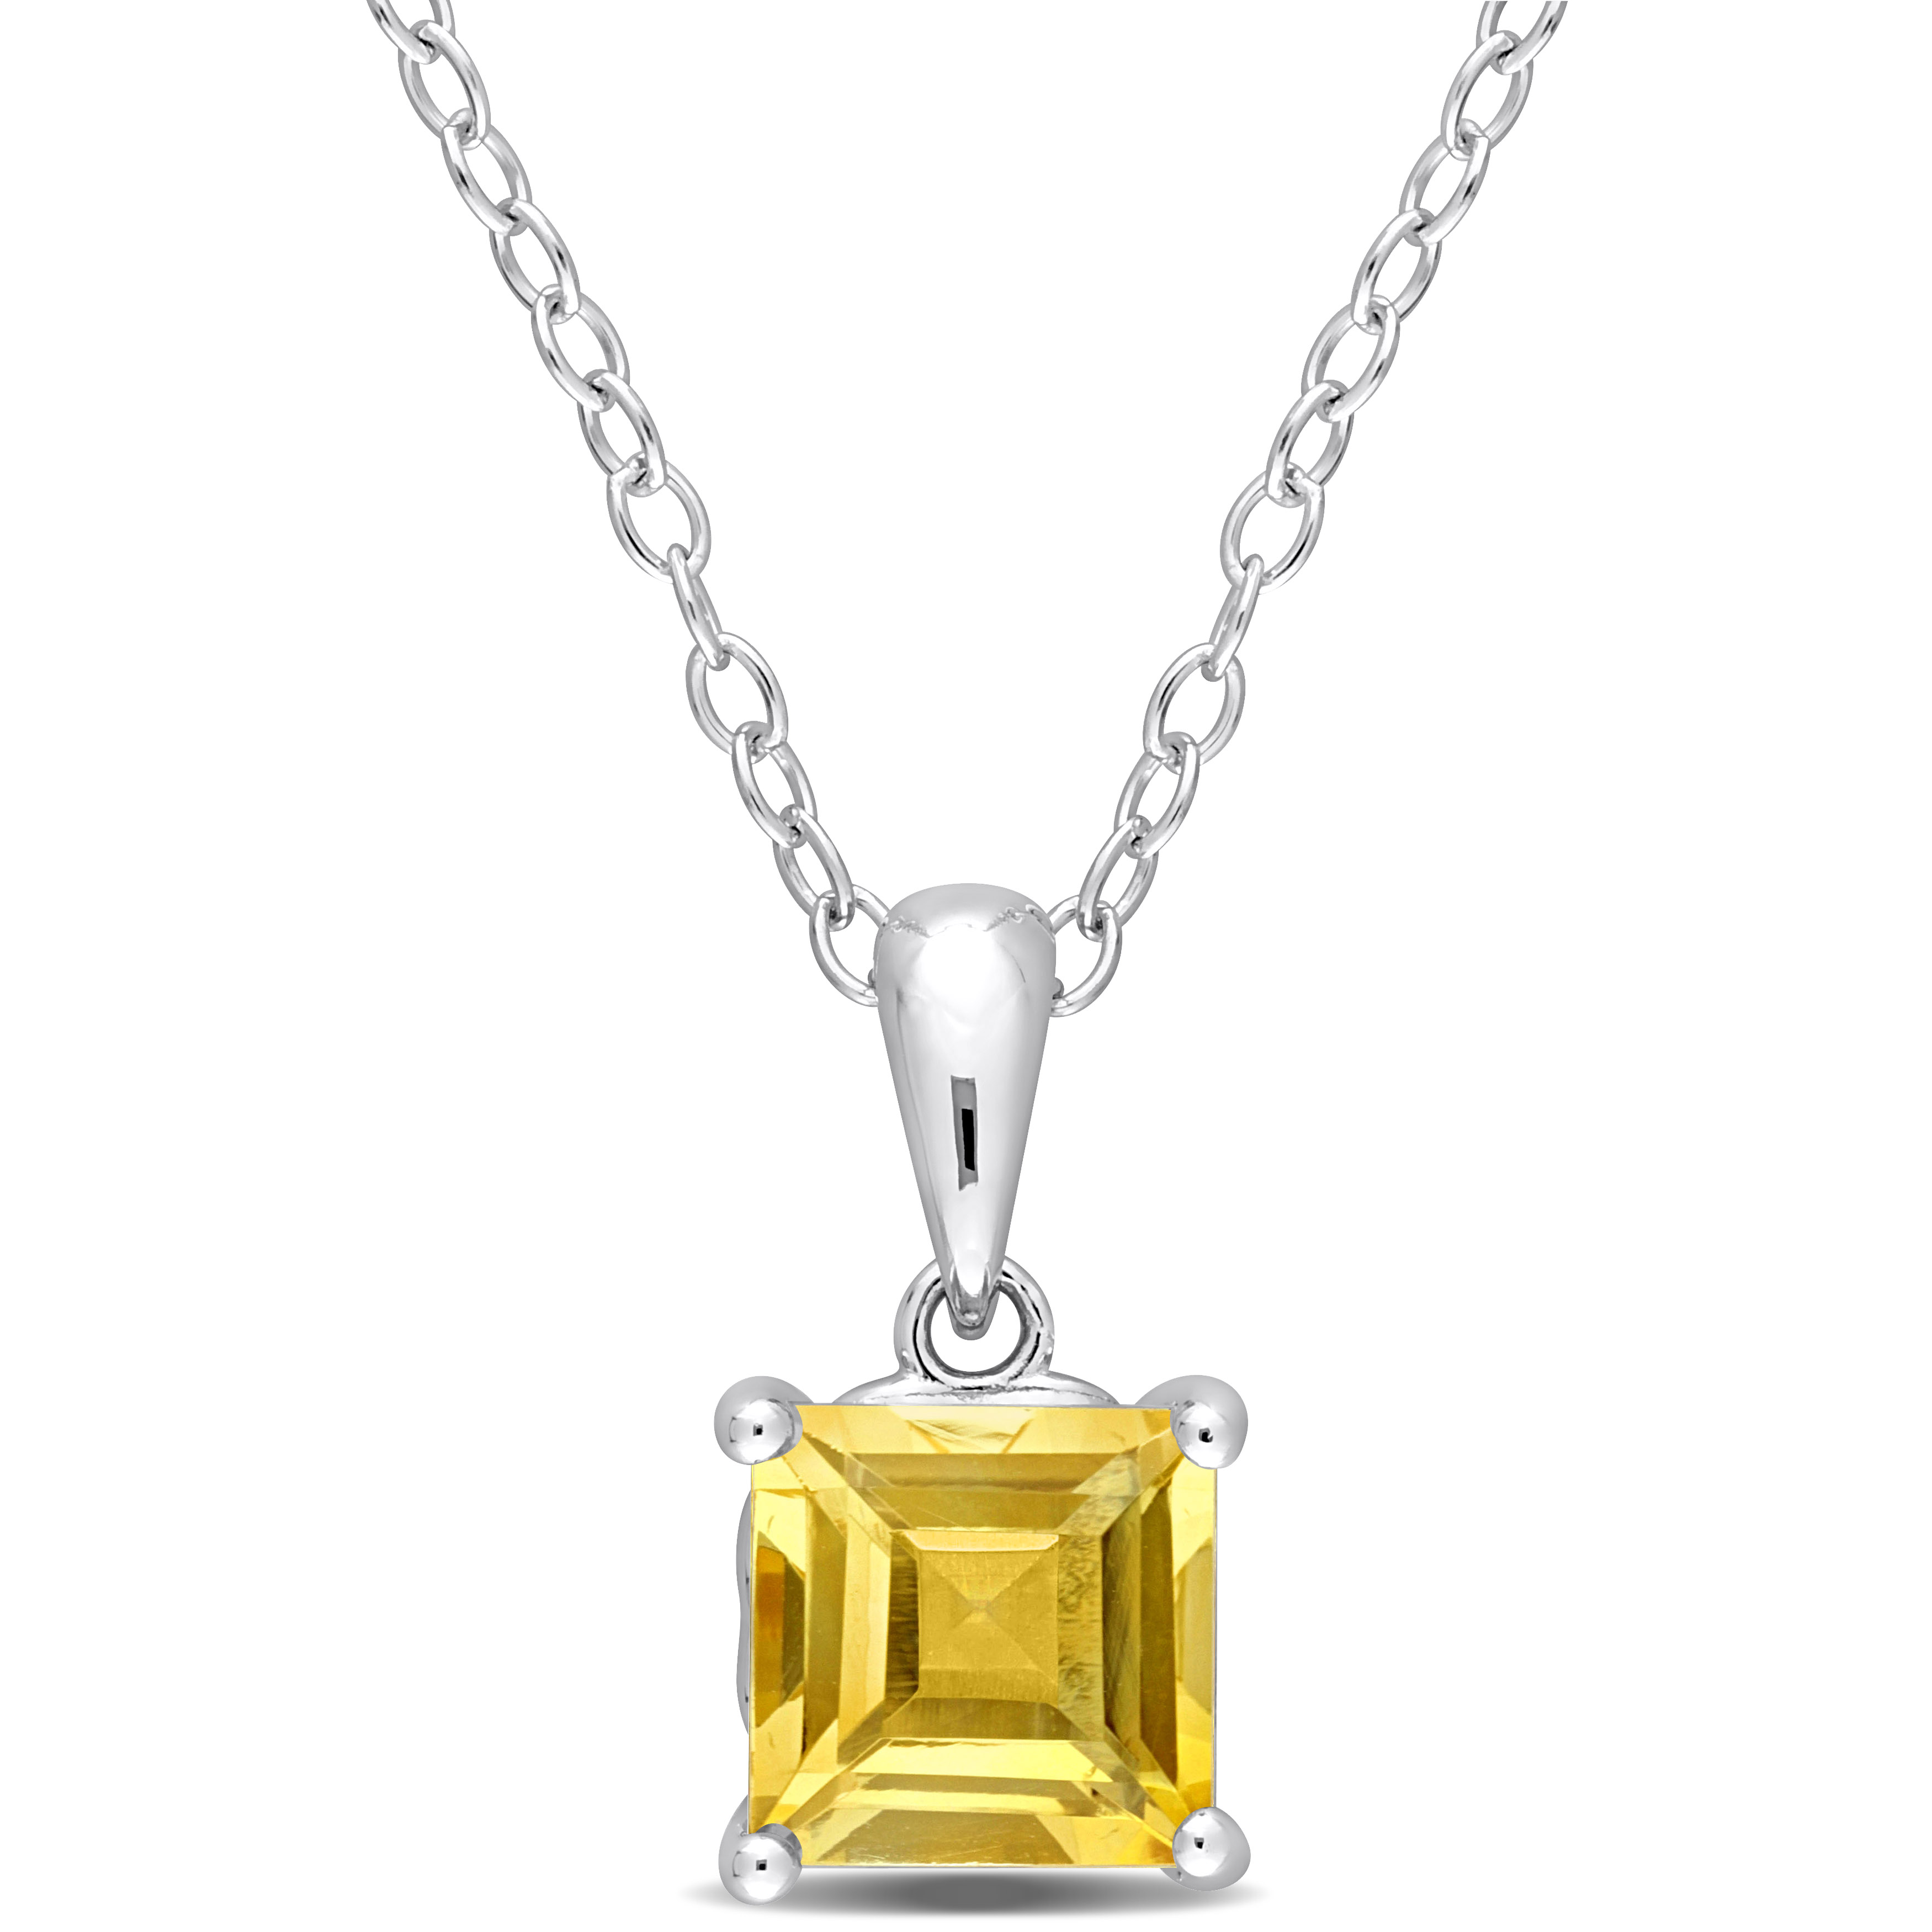 1 CT TGW Princess Cut Citrine Solitaire Heart Design Pendant with Chain in Sterling Silver - 18 in.